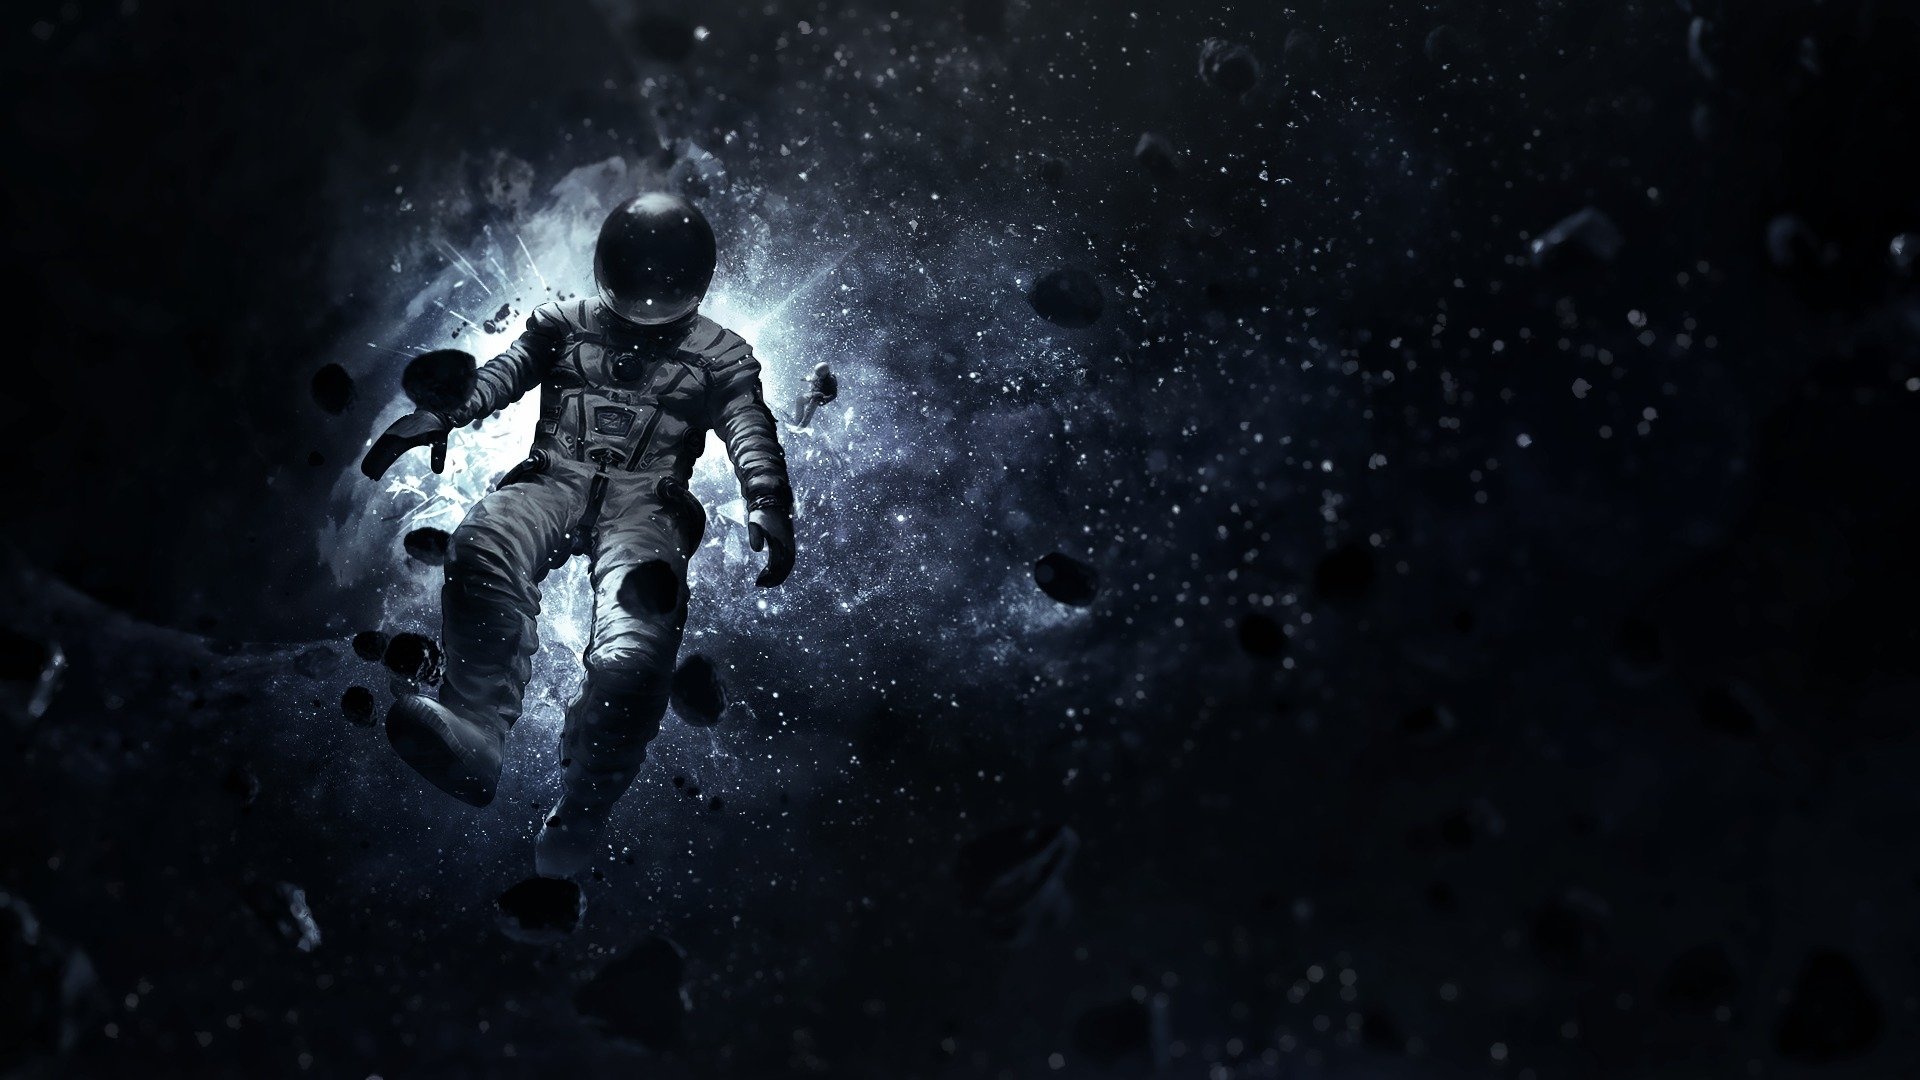 Astronaut Full HD Wallpaper and Background Image | 1920x1080 | ID:565696